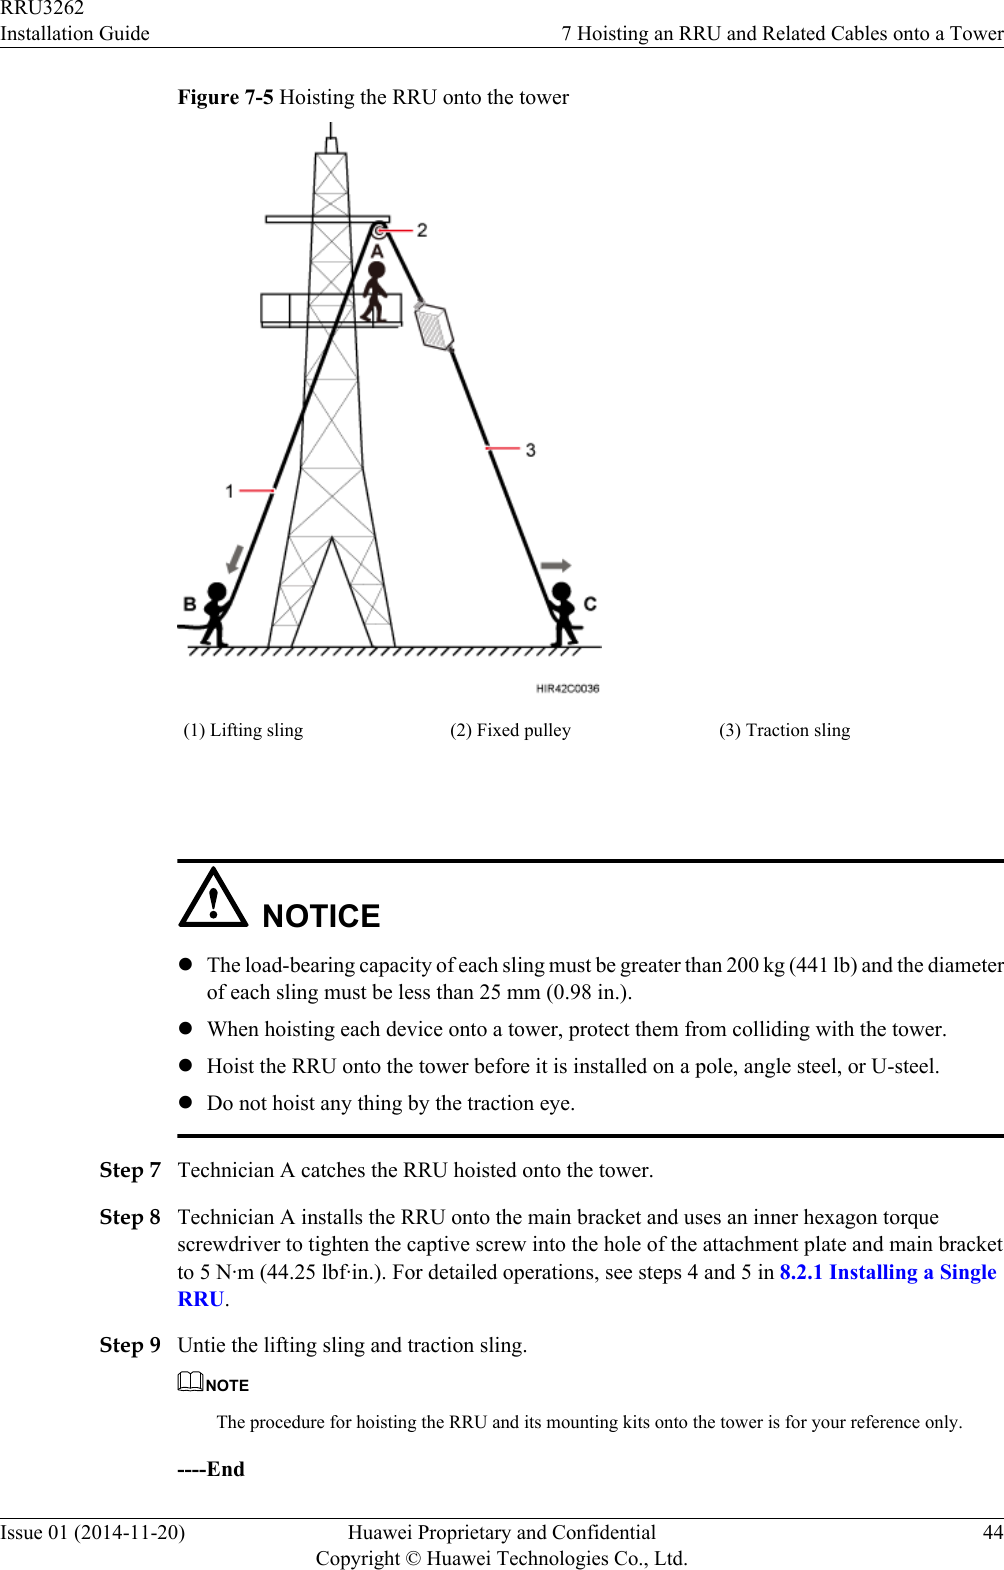 Figure 7-5 Hoisting the RRU onto the tower(1) Lifting sling (2) Fixed pulley (3) Traction sling NOTICElThe load-bearing capacity of each sling must be greater than 200 kg (441 lb) and the diameterof each sling must be less than 25 mm (0.98 in.).lWhen hoisting each device onto a tower, protect them from colliding with the tower.lHoist the RRU onto the tower before it is installed on a pole, angle steel, or U-steel.lDo not hoist any thing by the traction eye.Step 7 Technician A catches the RRU hoisted onto the tower.Step 8 Technician A installs the RRU onto the main bracket and uses an inner hexagon torquescrewdriver to tighten the captive screw into the hole of the attachment plate and main bracketto 5 N·m (44.25 lbf·in.). For detailed operations, see steps 4 and 5 in 8.2.1 Installing a SingleRRU.Step 9 Untie the lifting sling and traction sling.NOTEThe procedure for hoisting the RRU and its mounting kits onto the tower is for your reference only.----EndRRU3262Installation Guide 7 Hoisting an RRU and Related Cables onto a TowerIssue 01 (2014-11-20) Huawei Proprietary and ConfidentialCopyright © Huawei Technologies Co., Ltd.44